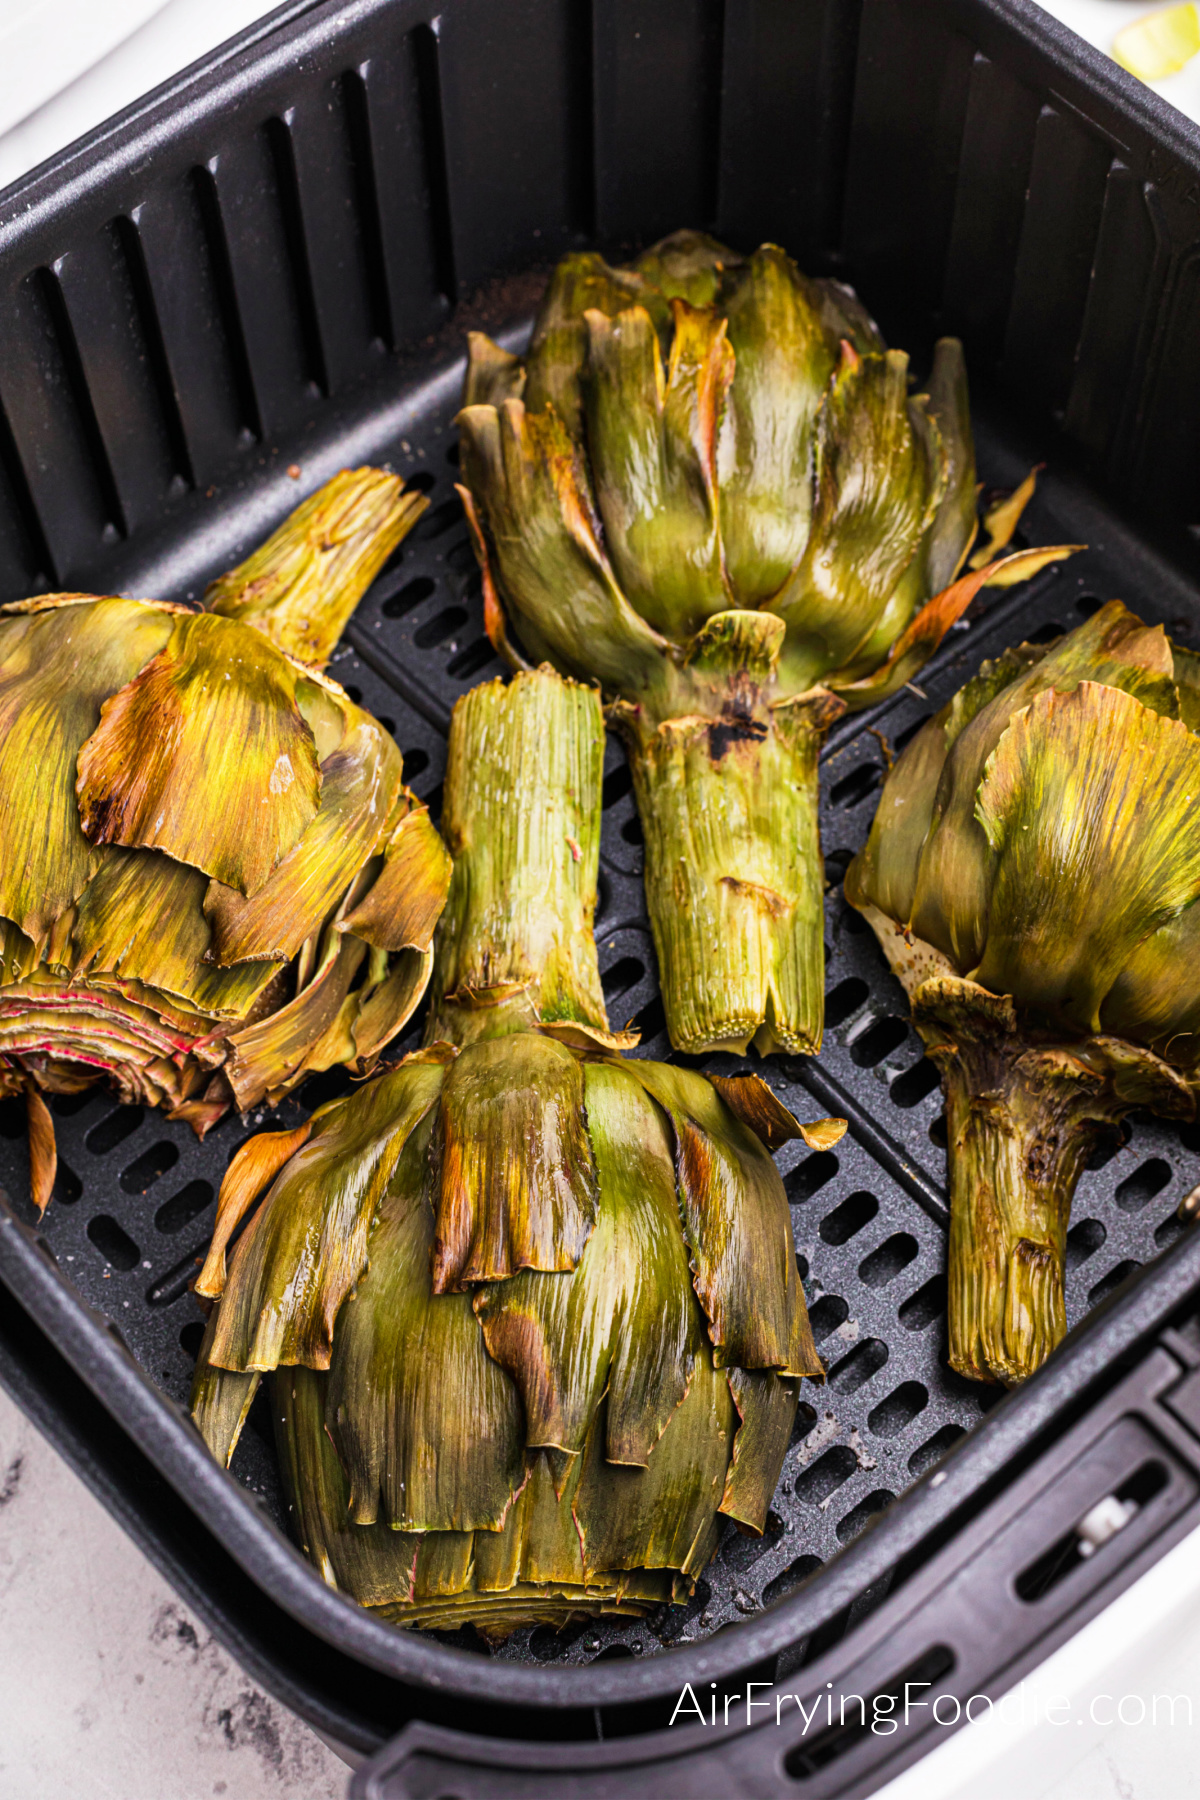 Cooked artichoke in the basket of the air fryer.